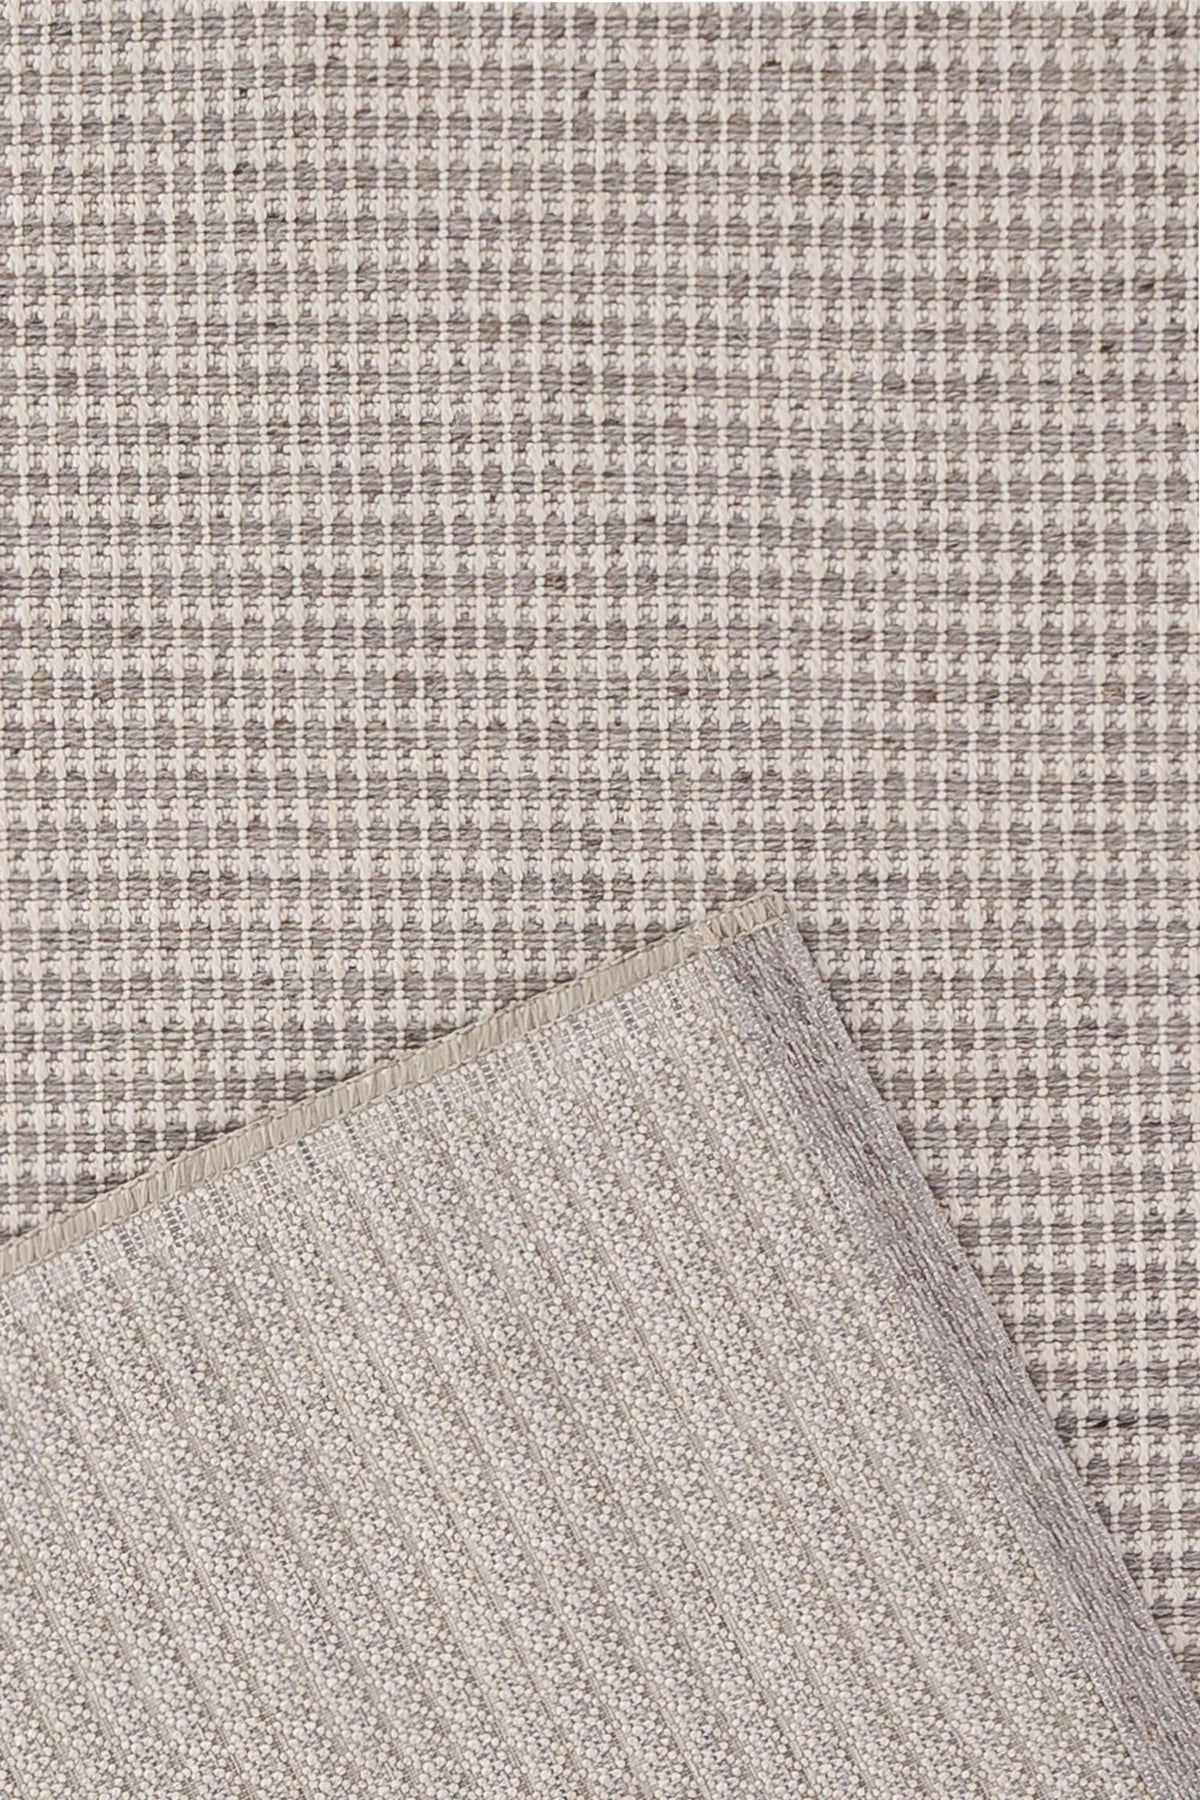 Tapis laine synthétique - Taupe